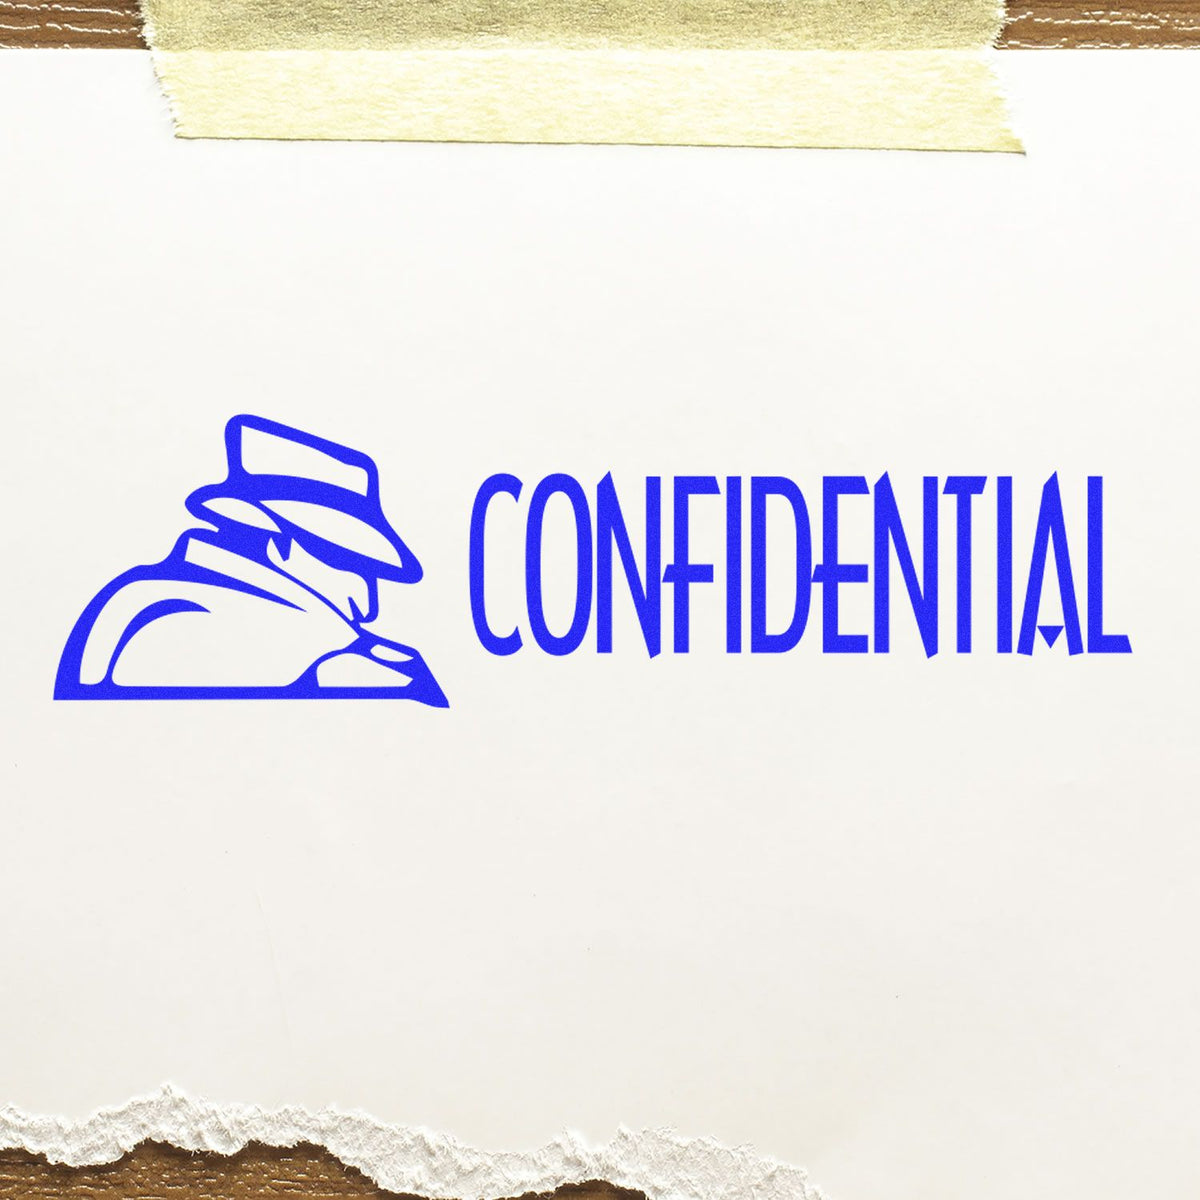 Large Confidential with Logo Rubber Stamp In Use Photo